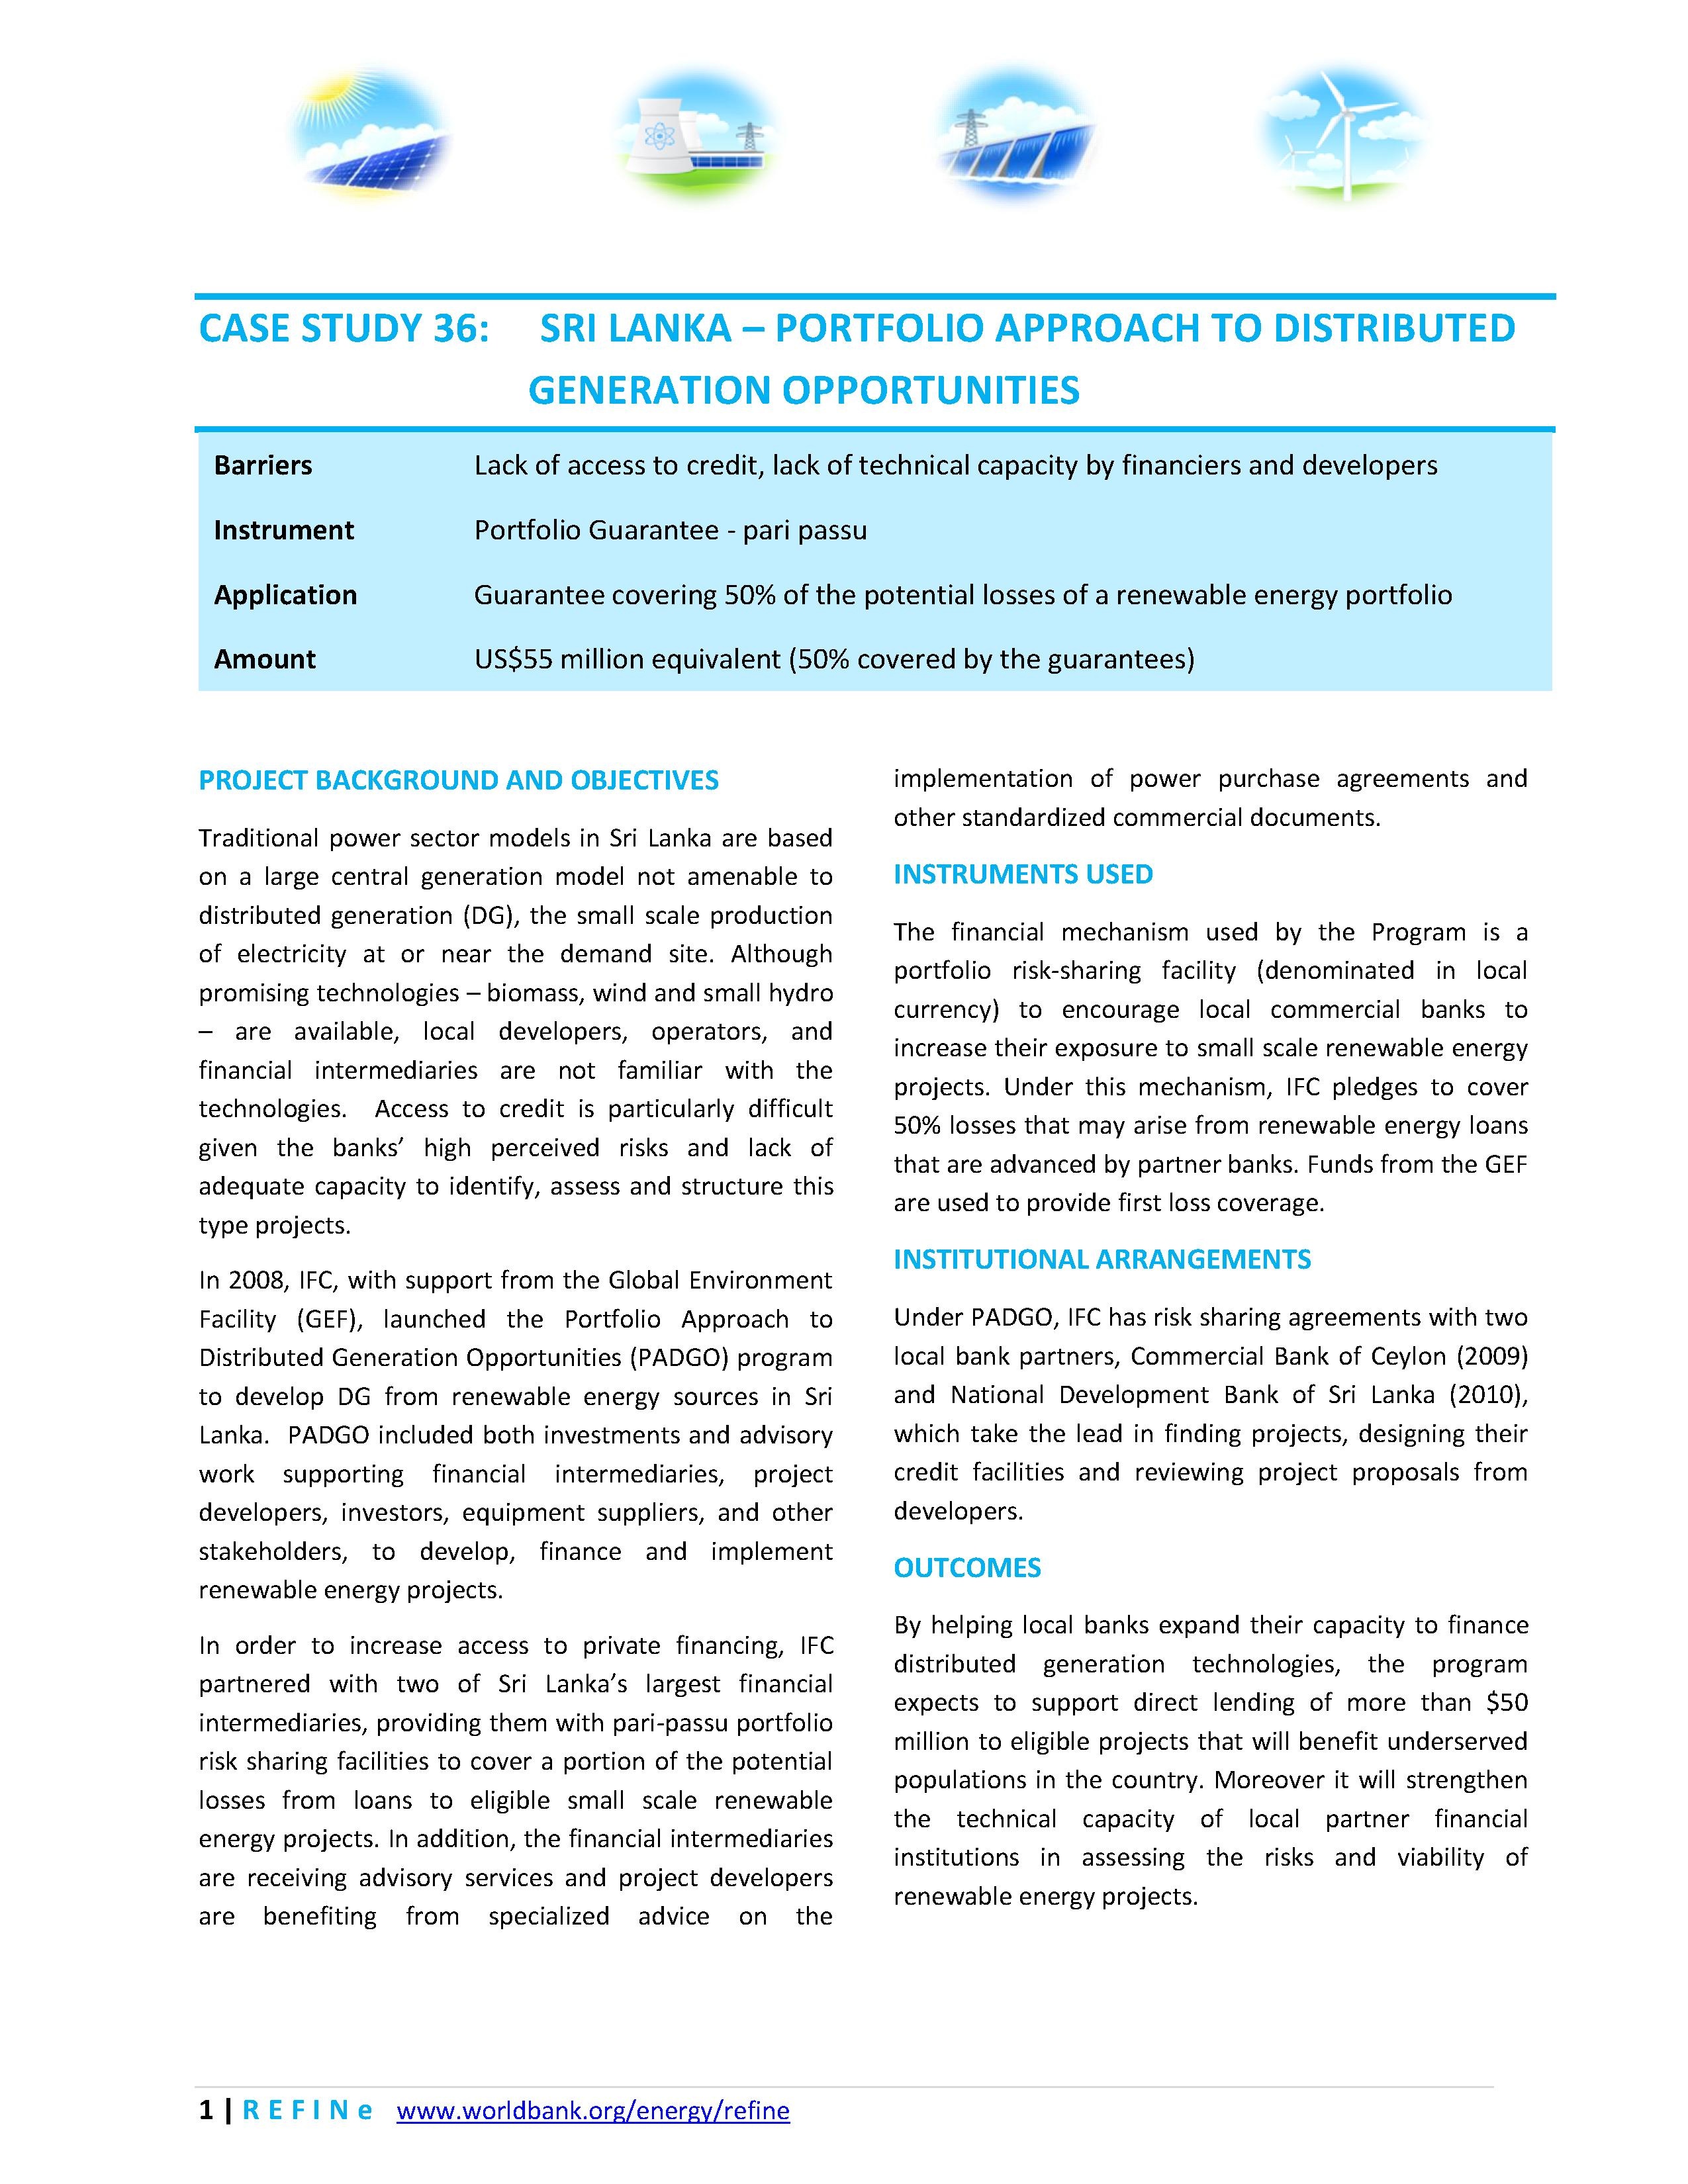 File:SriLanka - Portfolio Approach to Distributed Generation Opportunities.pdf